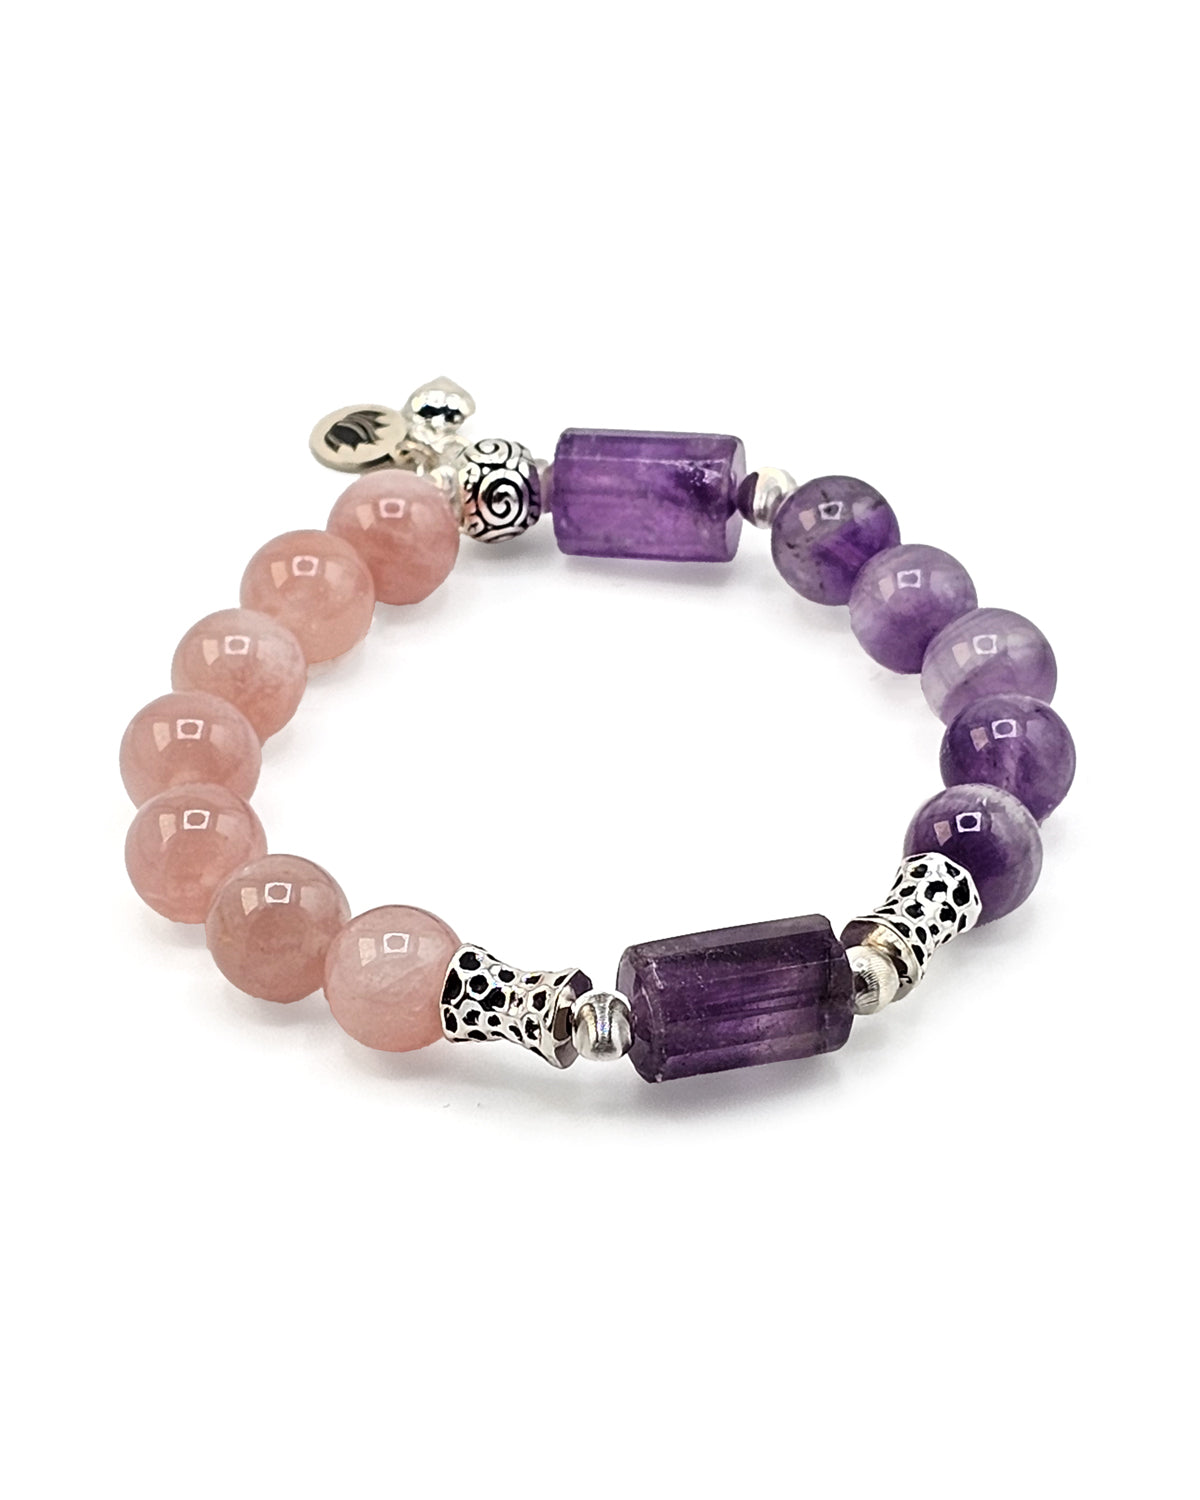 Strong Love Healing Intention Bracelet with Amethyst, Madagascar Rose Quartz and 925 Sterling Silver 7 inch font view